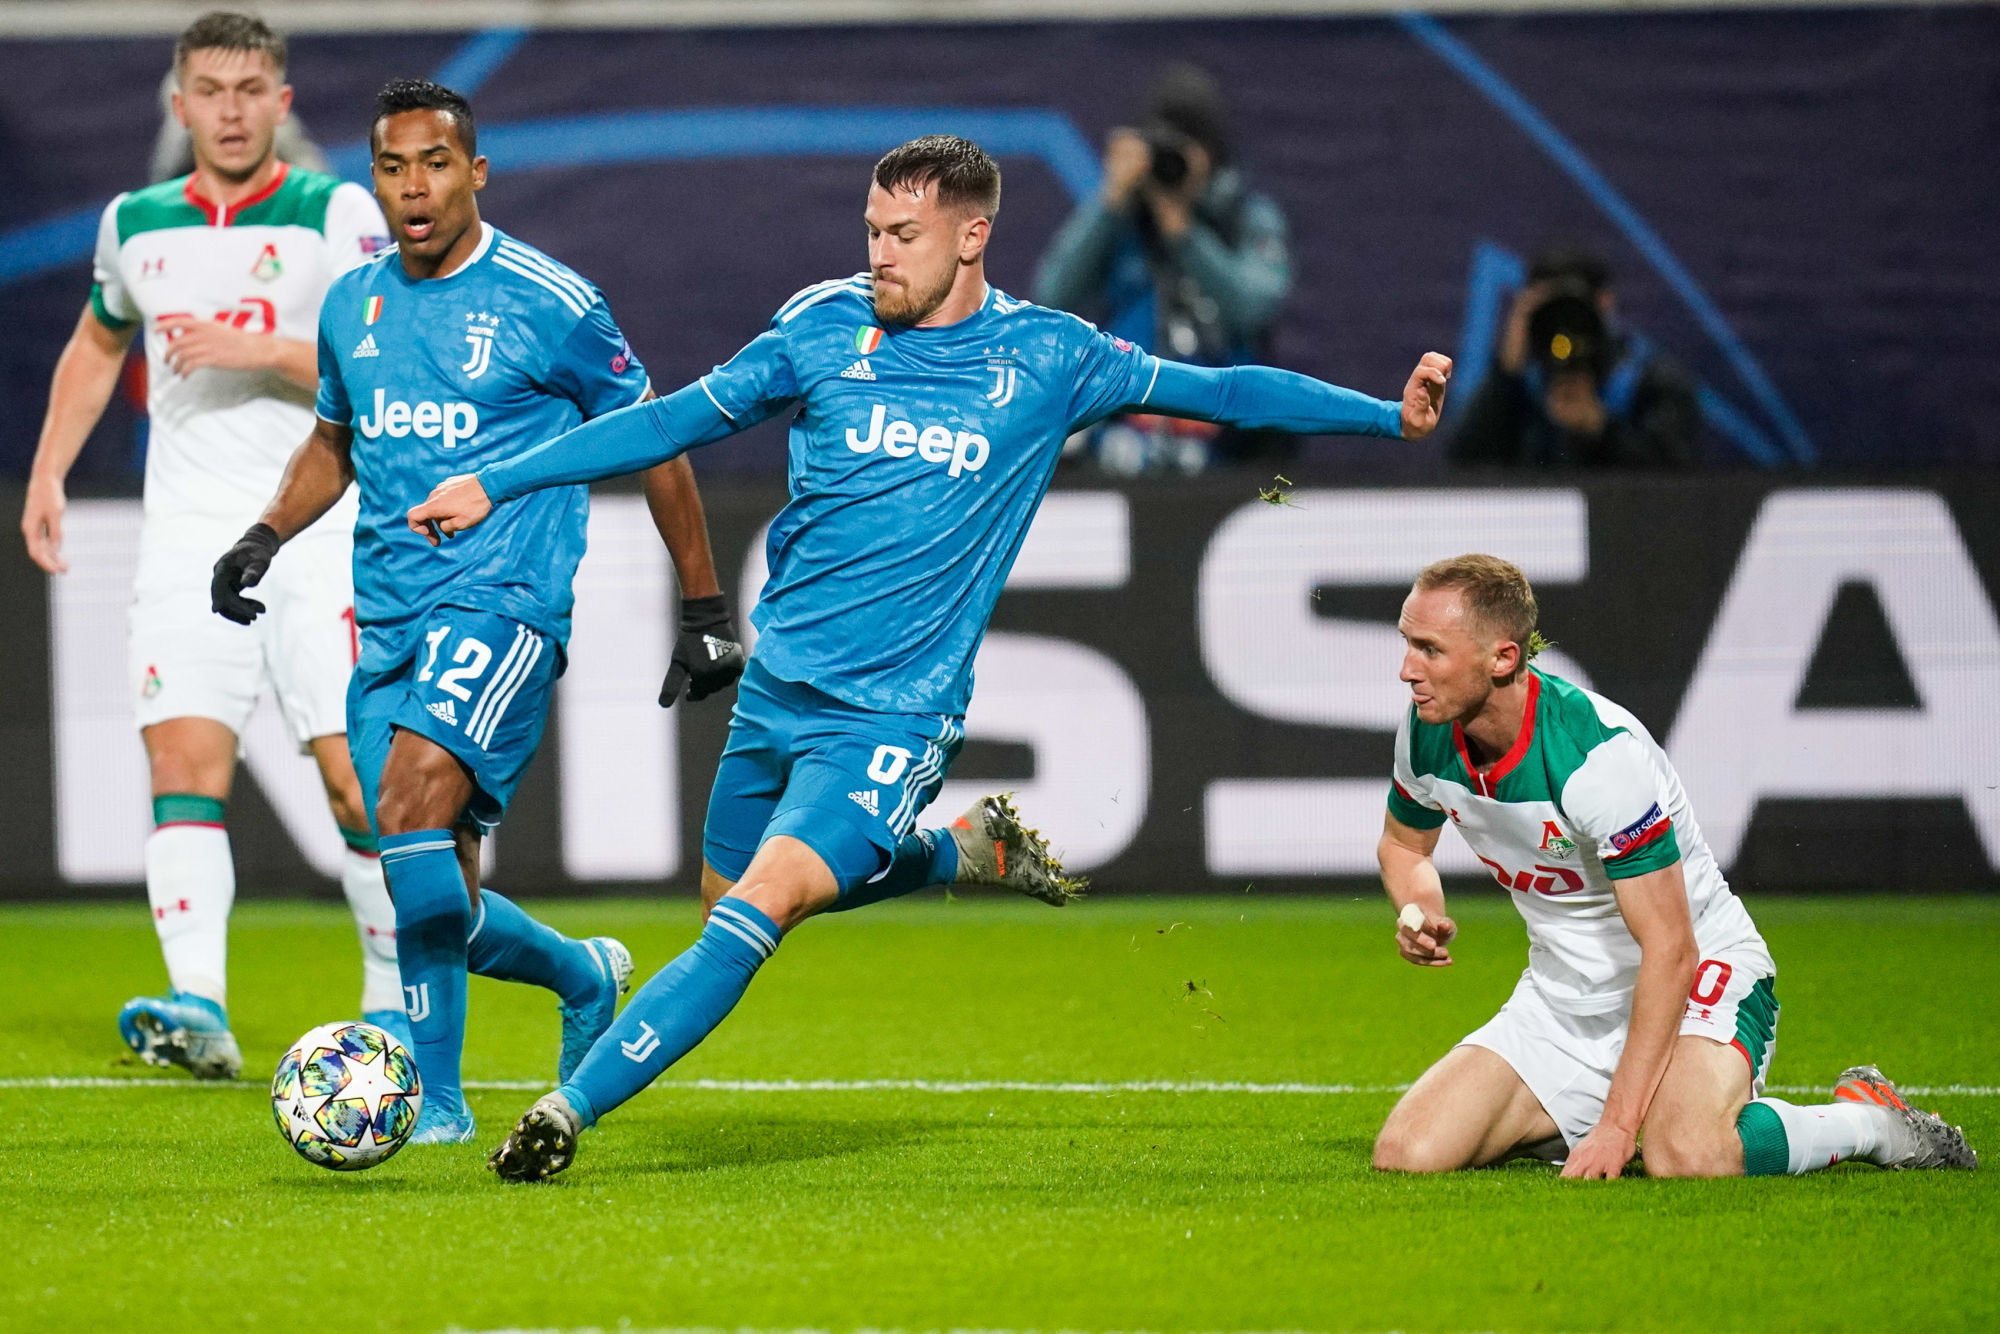 6065985 06.11.2019 Juventus' Aaron Ramsey, centre, controls a ball during the Champions League soccer match between Lokomotiv Moscow and Juventus, in Moscow, Russia. Alexander Vilf / Sputnik 

Photo by Icon Sport - Aaron RAMSEY - RZD Arena - Moscou (Russie)